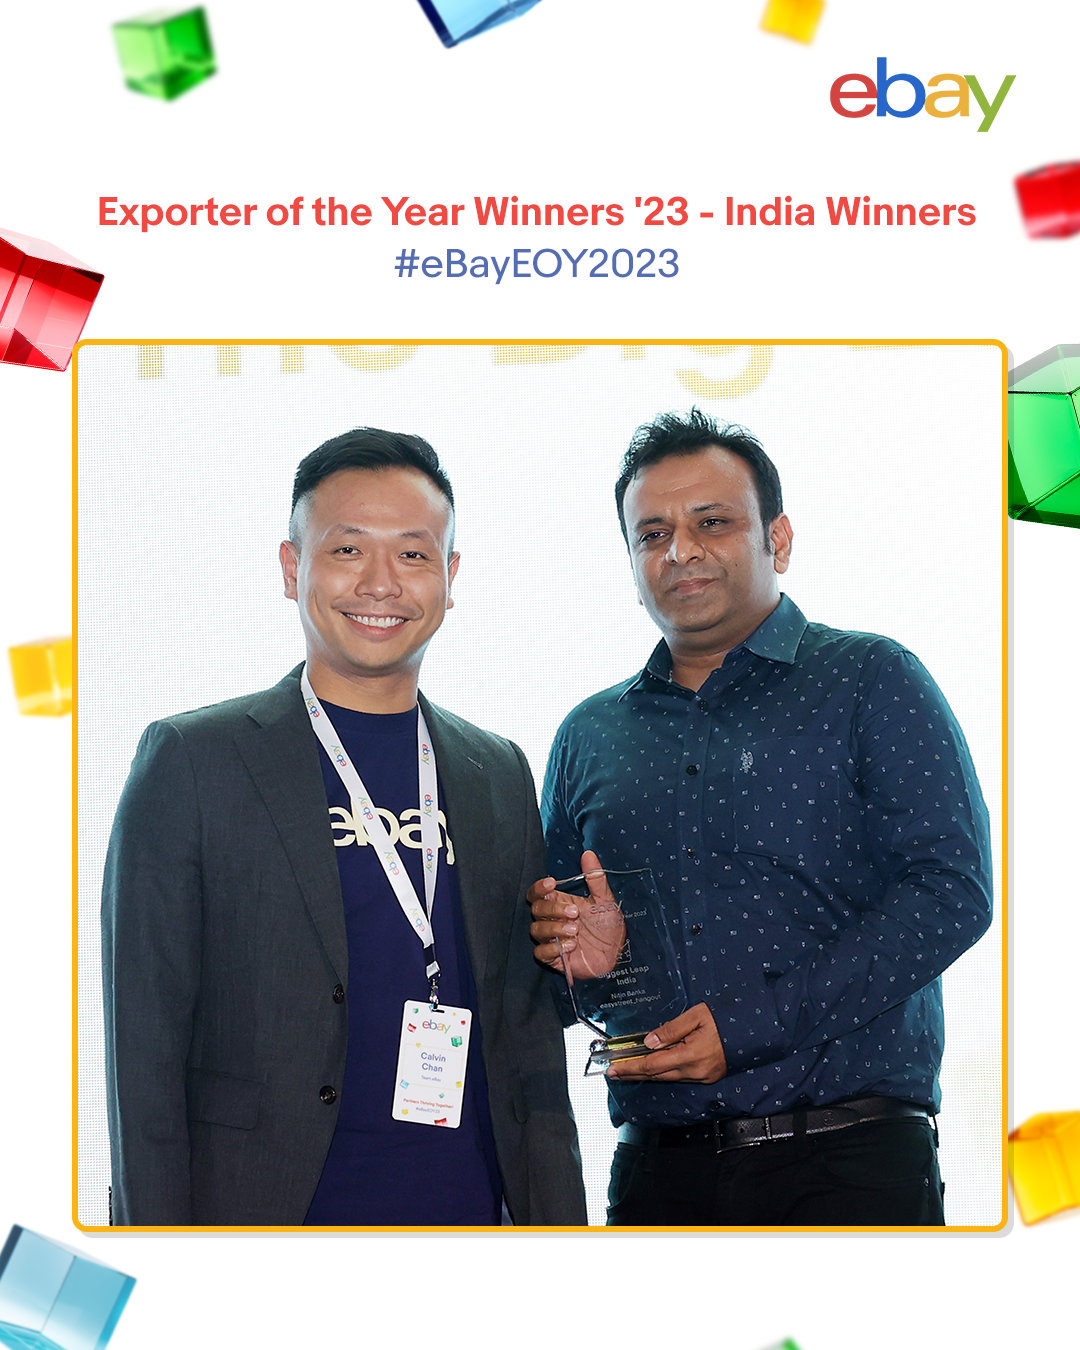 Exporter-of-the-Year-Winners23.1.png